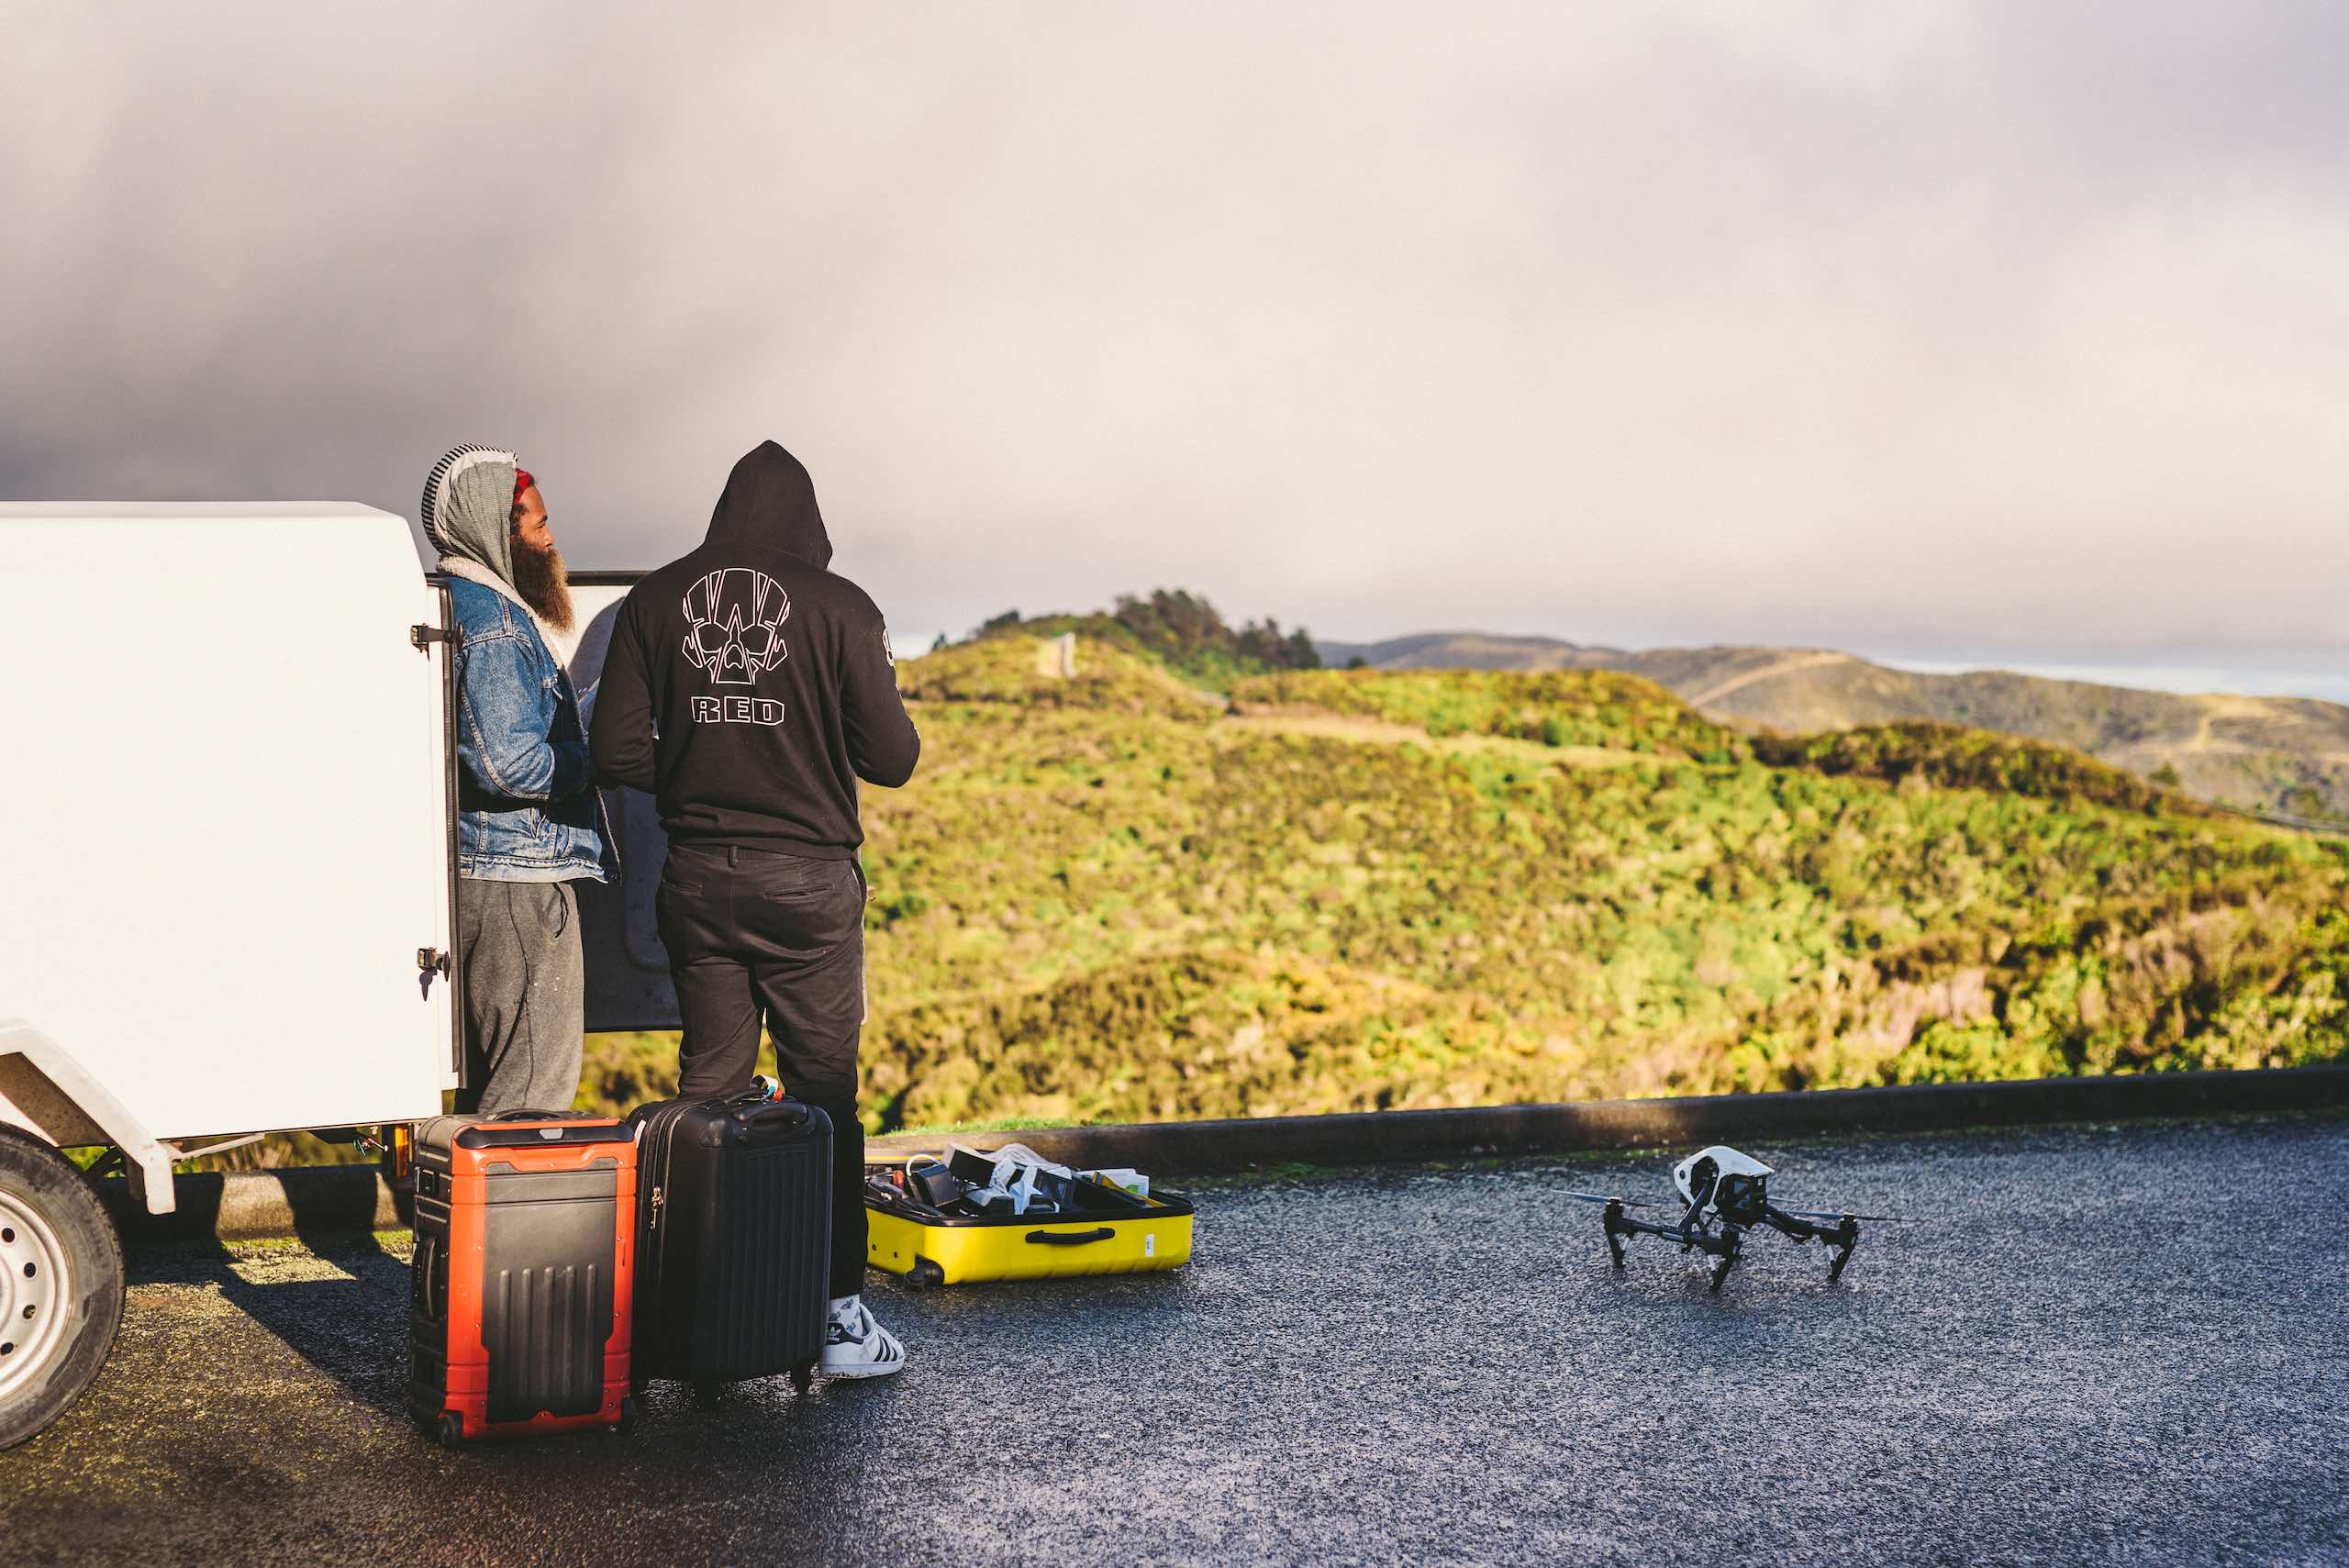 Two crew members by a white fan looking out over a valley with drone and equipment around them